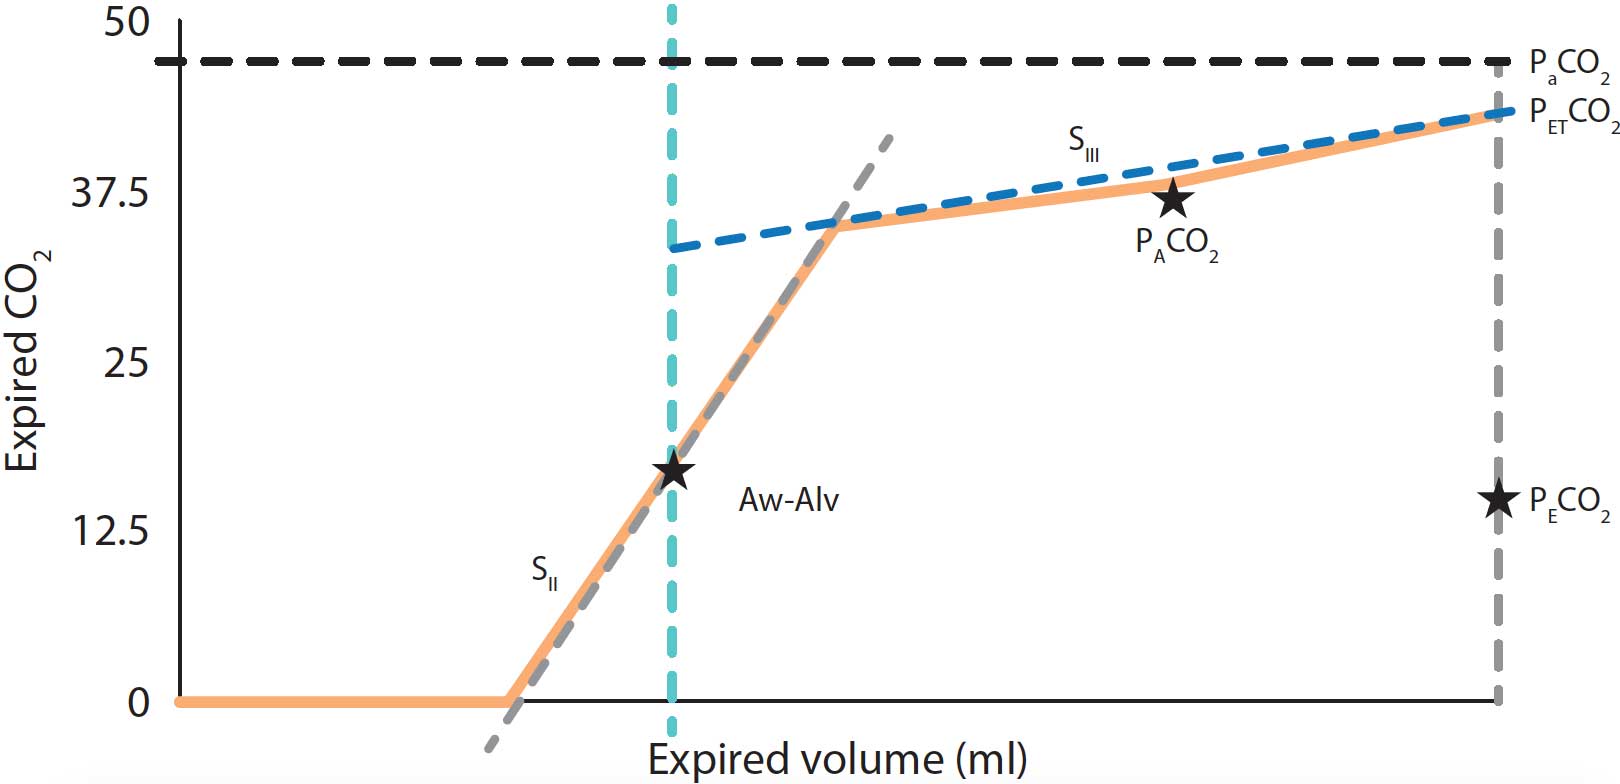 Figure 5. Diagram representing a volumetric capnography during a normal respiratory cycle. SII = the slope of phase II, determined by the gas rich in CO2 coming from the alveoli; SIII = the slope of phase III created by gas from the alveolar compartment and provides V/Q matching information; Aw-Alv = the mean airway-alveolar interface, which is the division between the airway and the alveolar compartment; PACO2 = the mean partial pressure of CO2 within the alveolar compartment; PaCO2 = the arterial tension of CO2; PECO2 = the concentration of mixed expired CO2; PETCO2 = the end-tidal partial pressure of CO2.